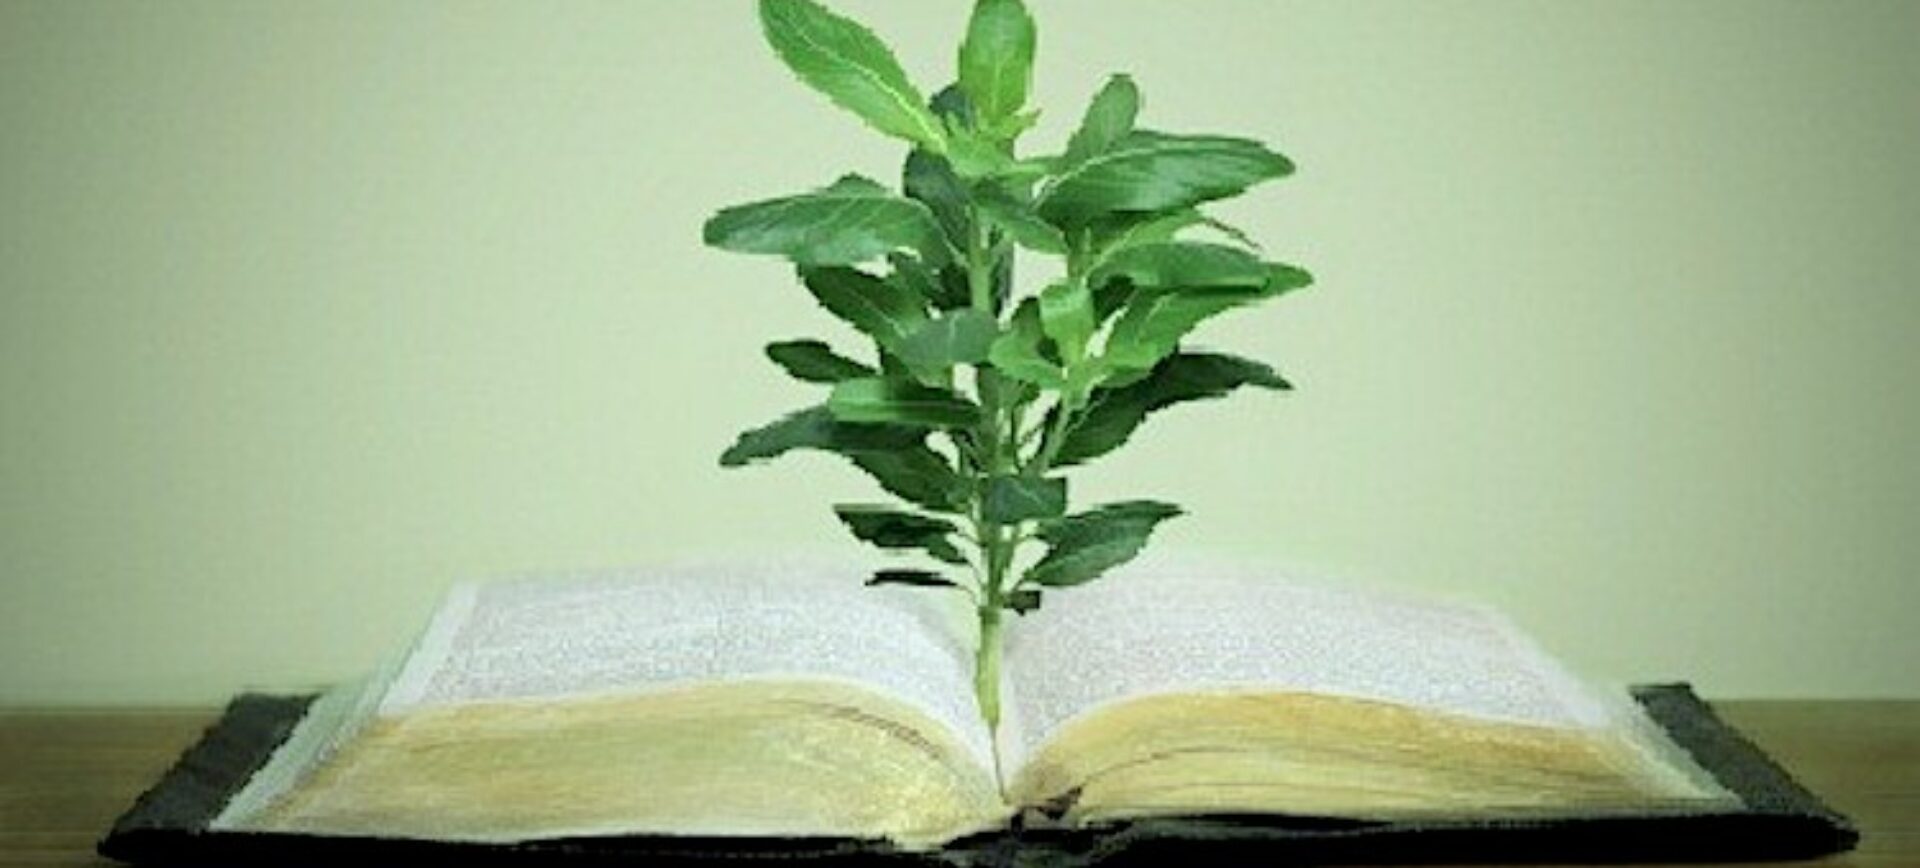 Old book (bible) with plant, on green background